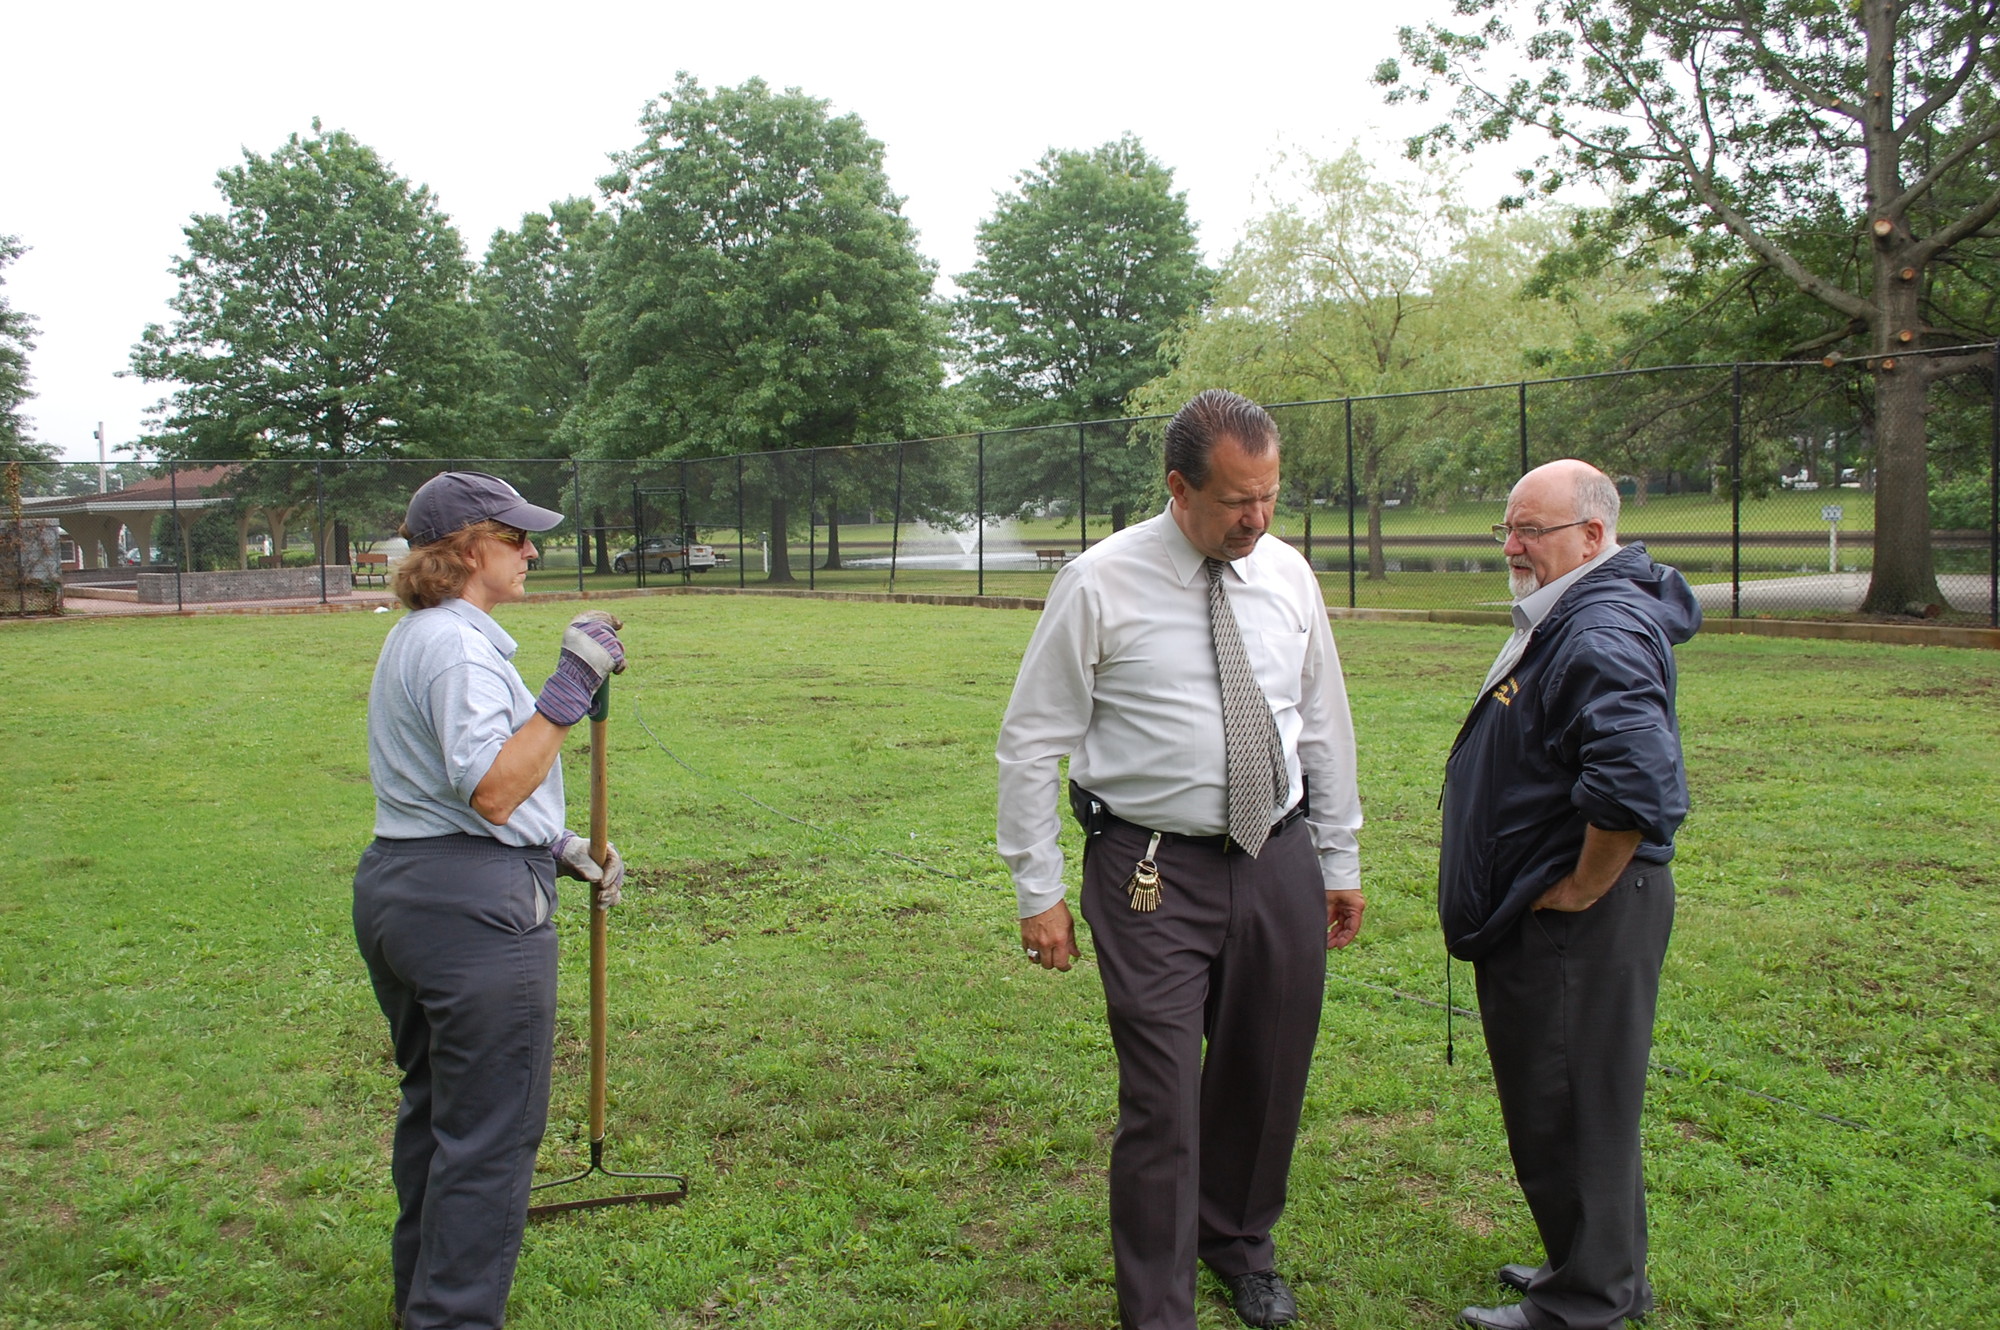 Lorraine Werbeck of the Parks Department gets an area ready at Hendrickson Park for Monday movie nights as Mayor Ed Fare and Deputy Village Clerk Richard DeAngelis look over the progress.